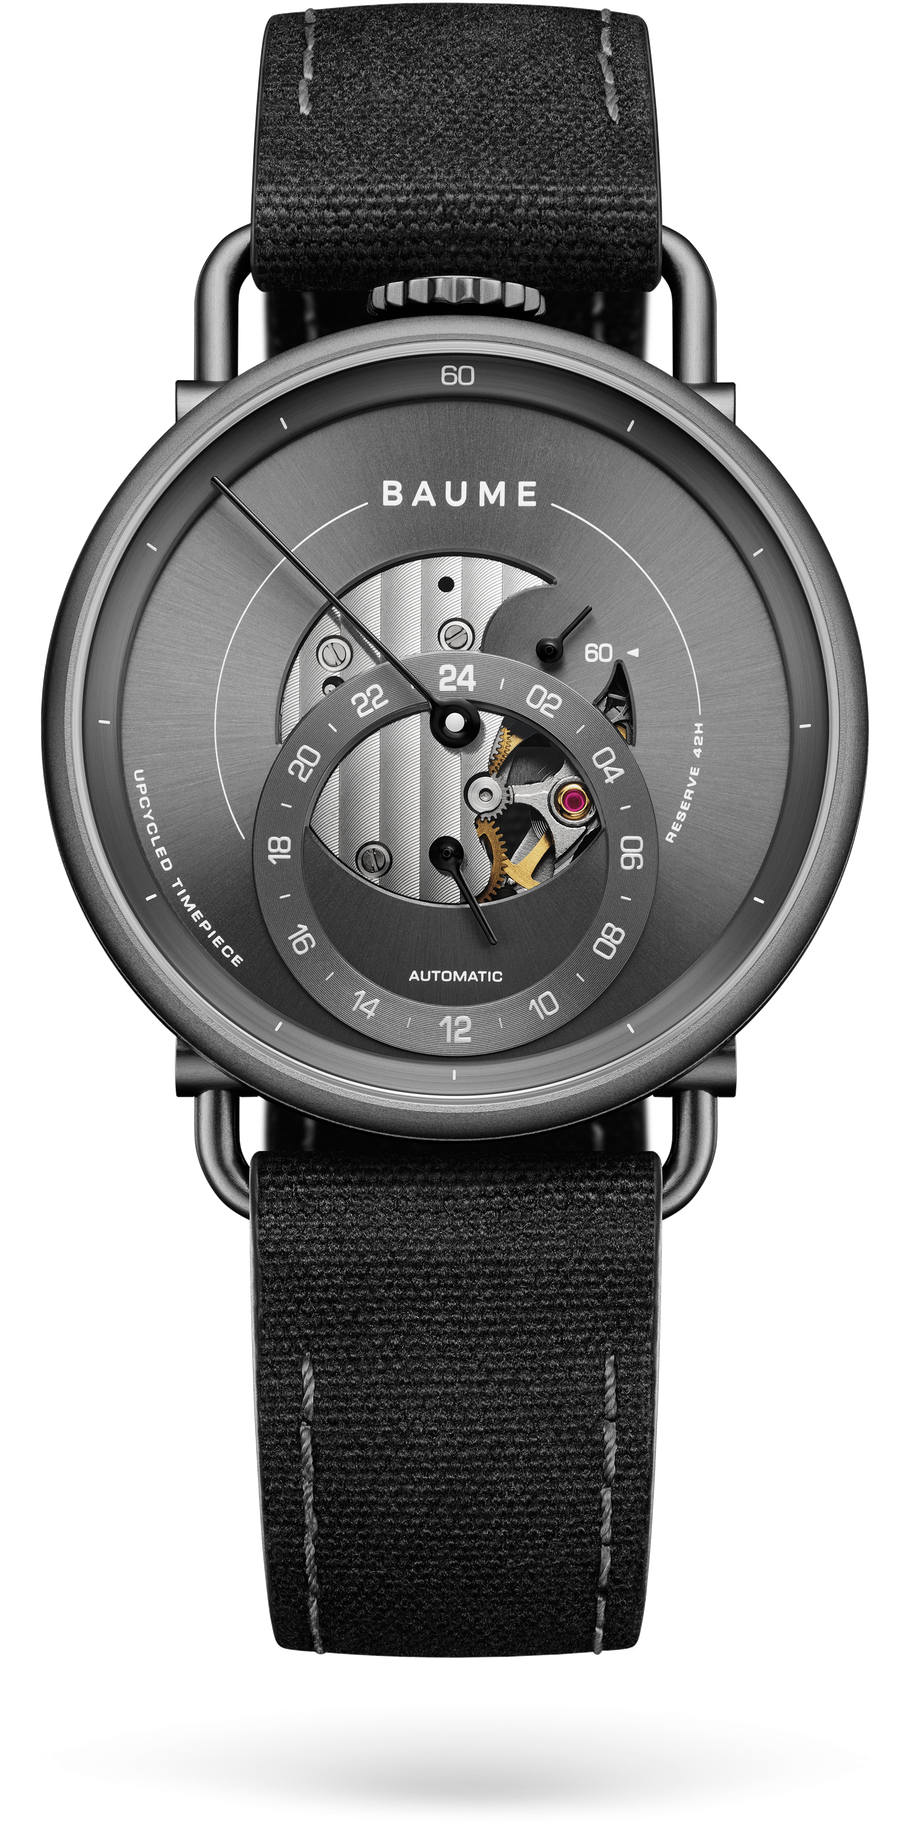 The Richemont Group Introduces Baume, a New Entry-Level Brand